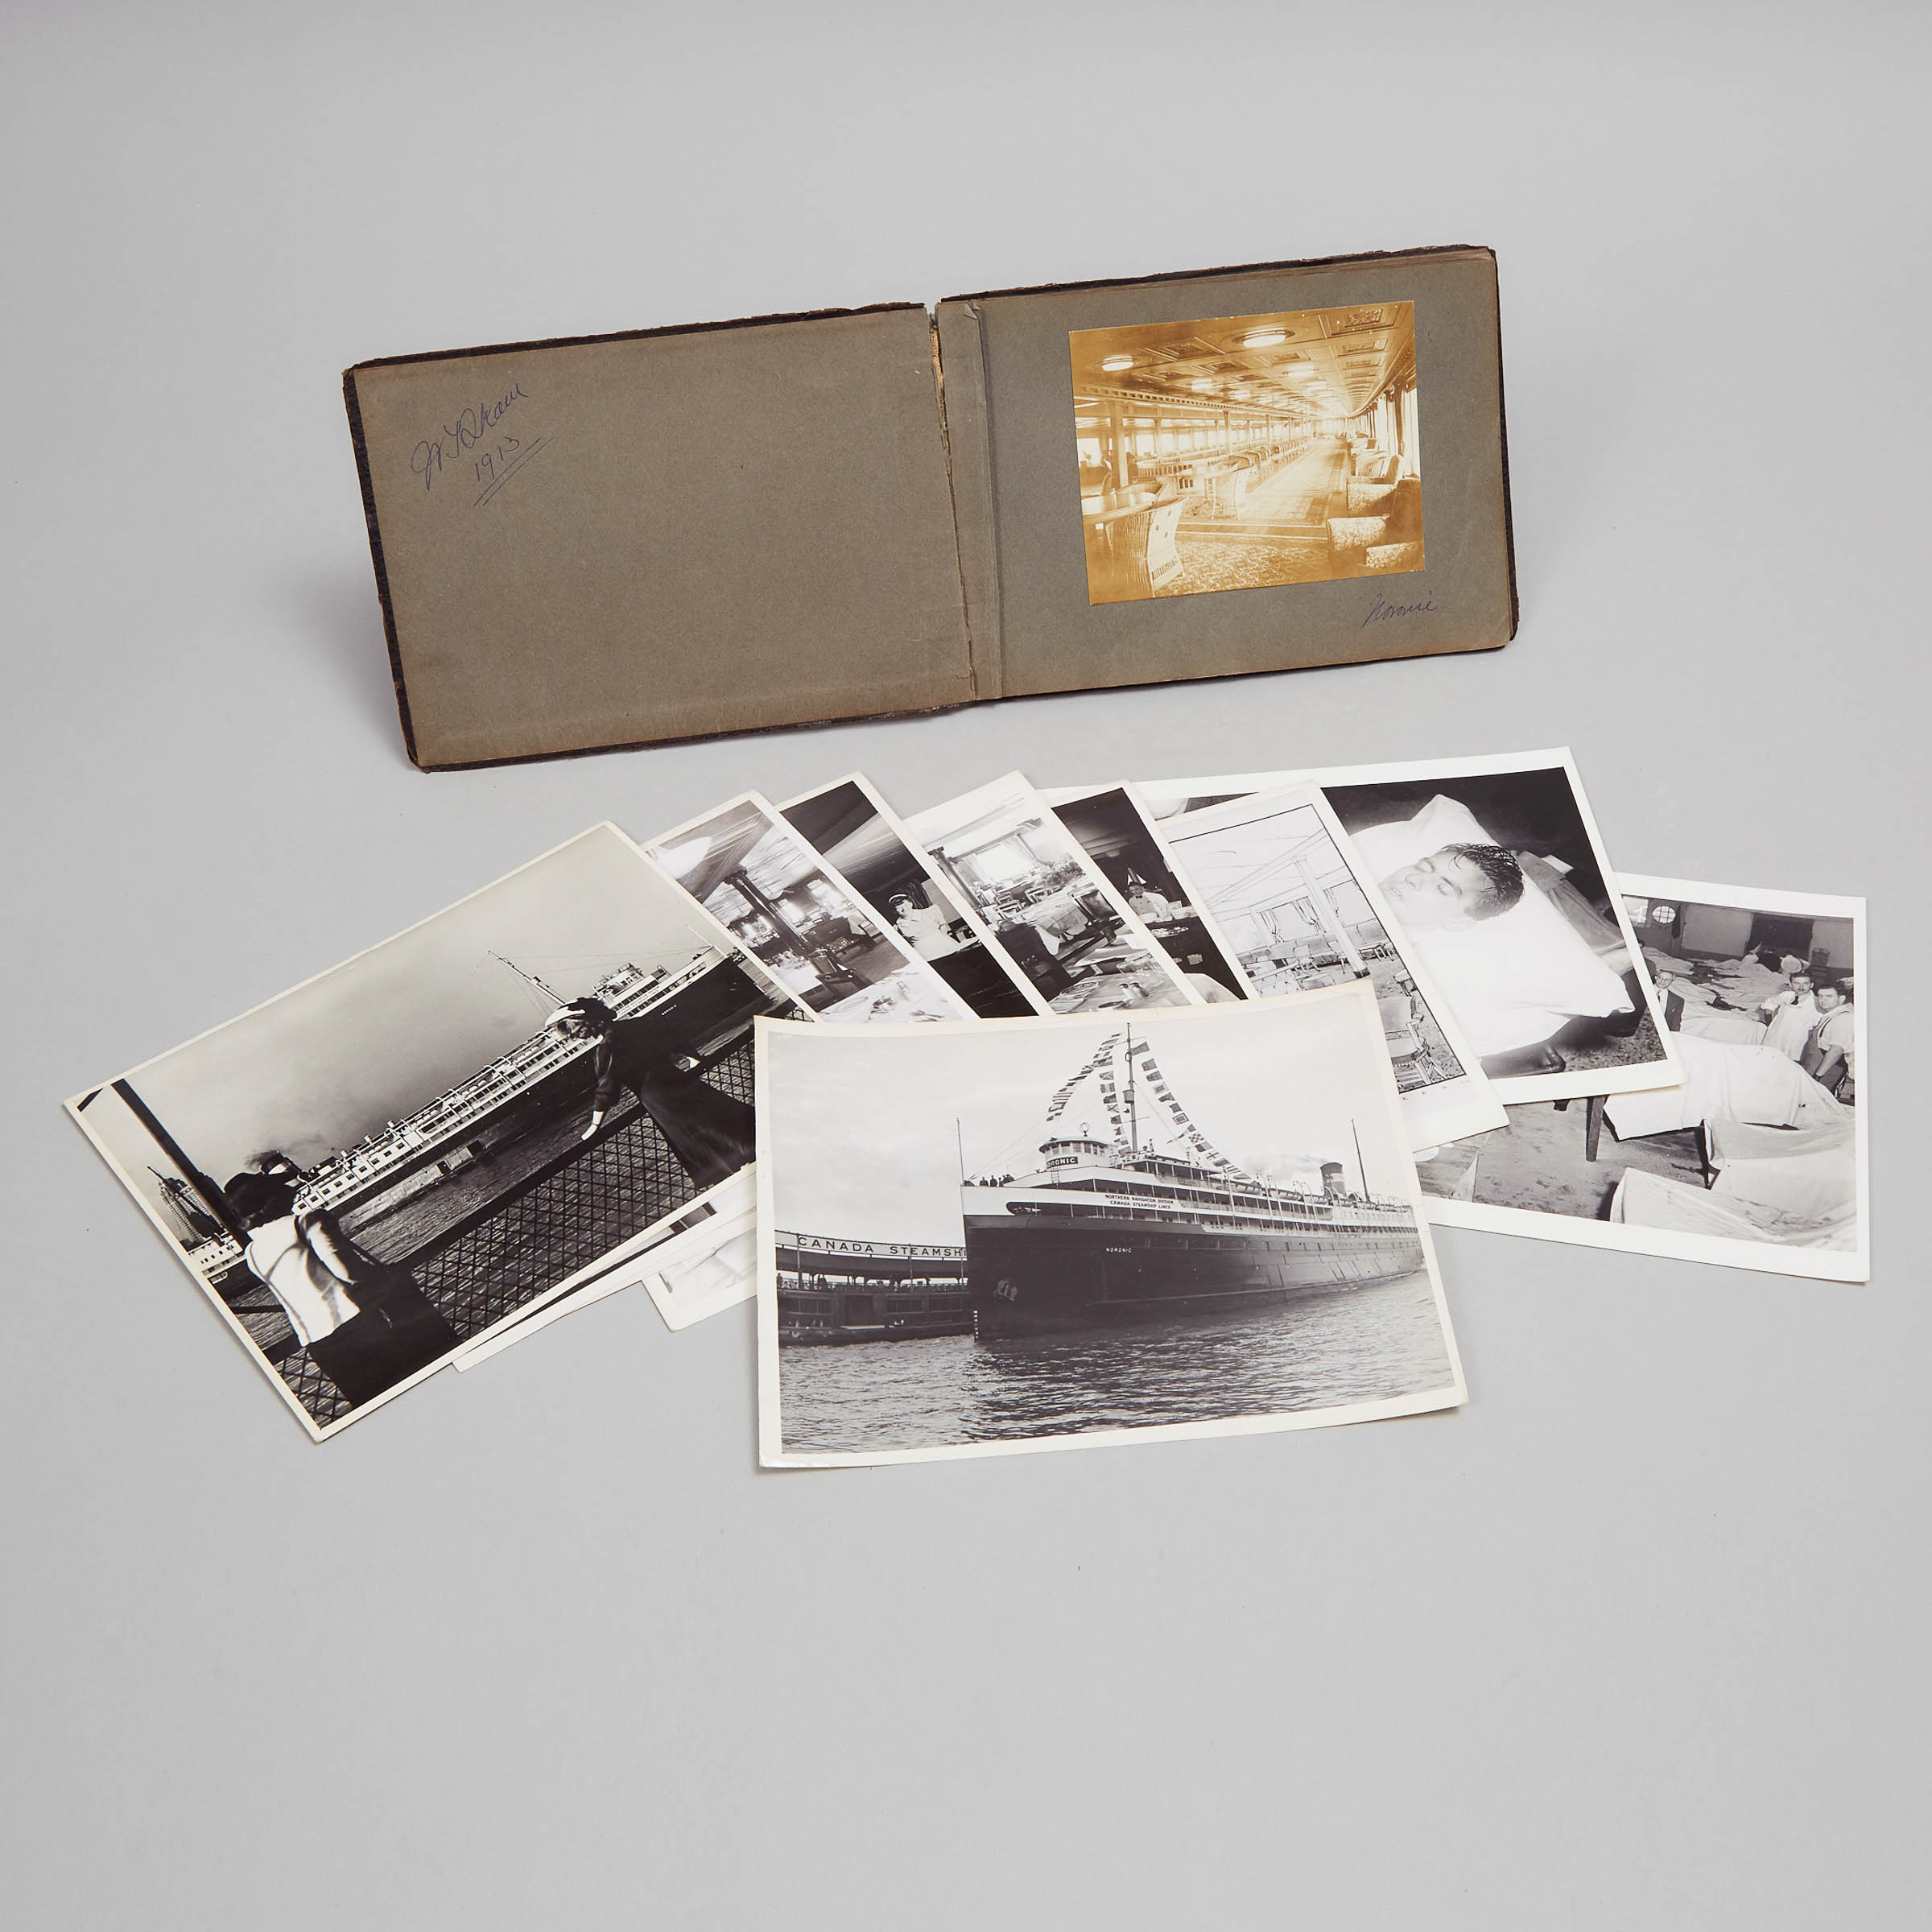 Collection of Photographs of Canada Steamship Lines/Northern Navigation Division's S.S. Noronic and S.S. Harmonic, 1913 and 1945 